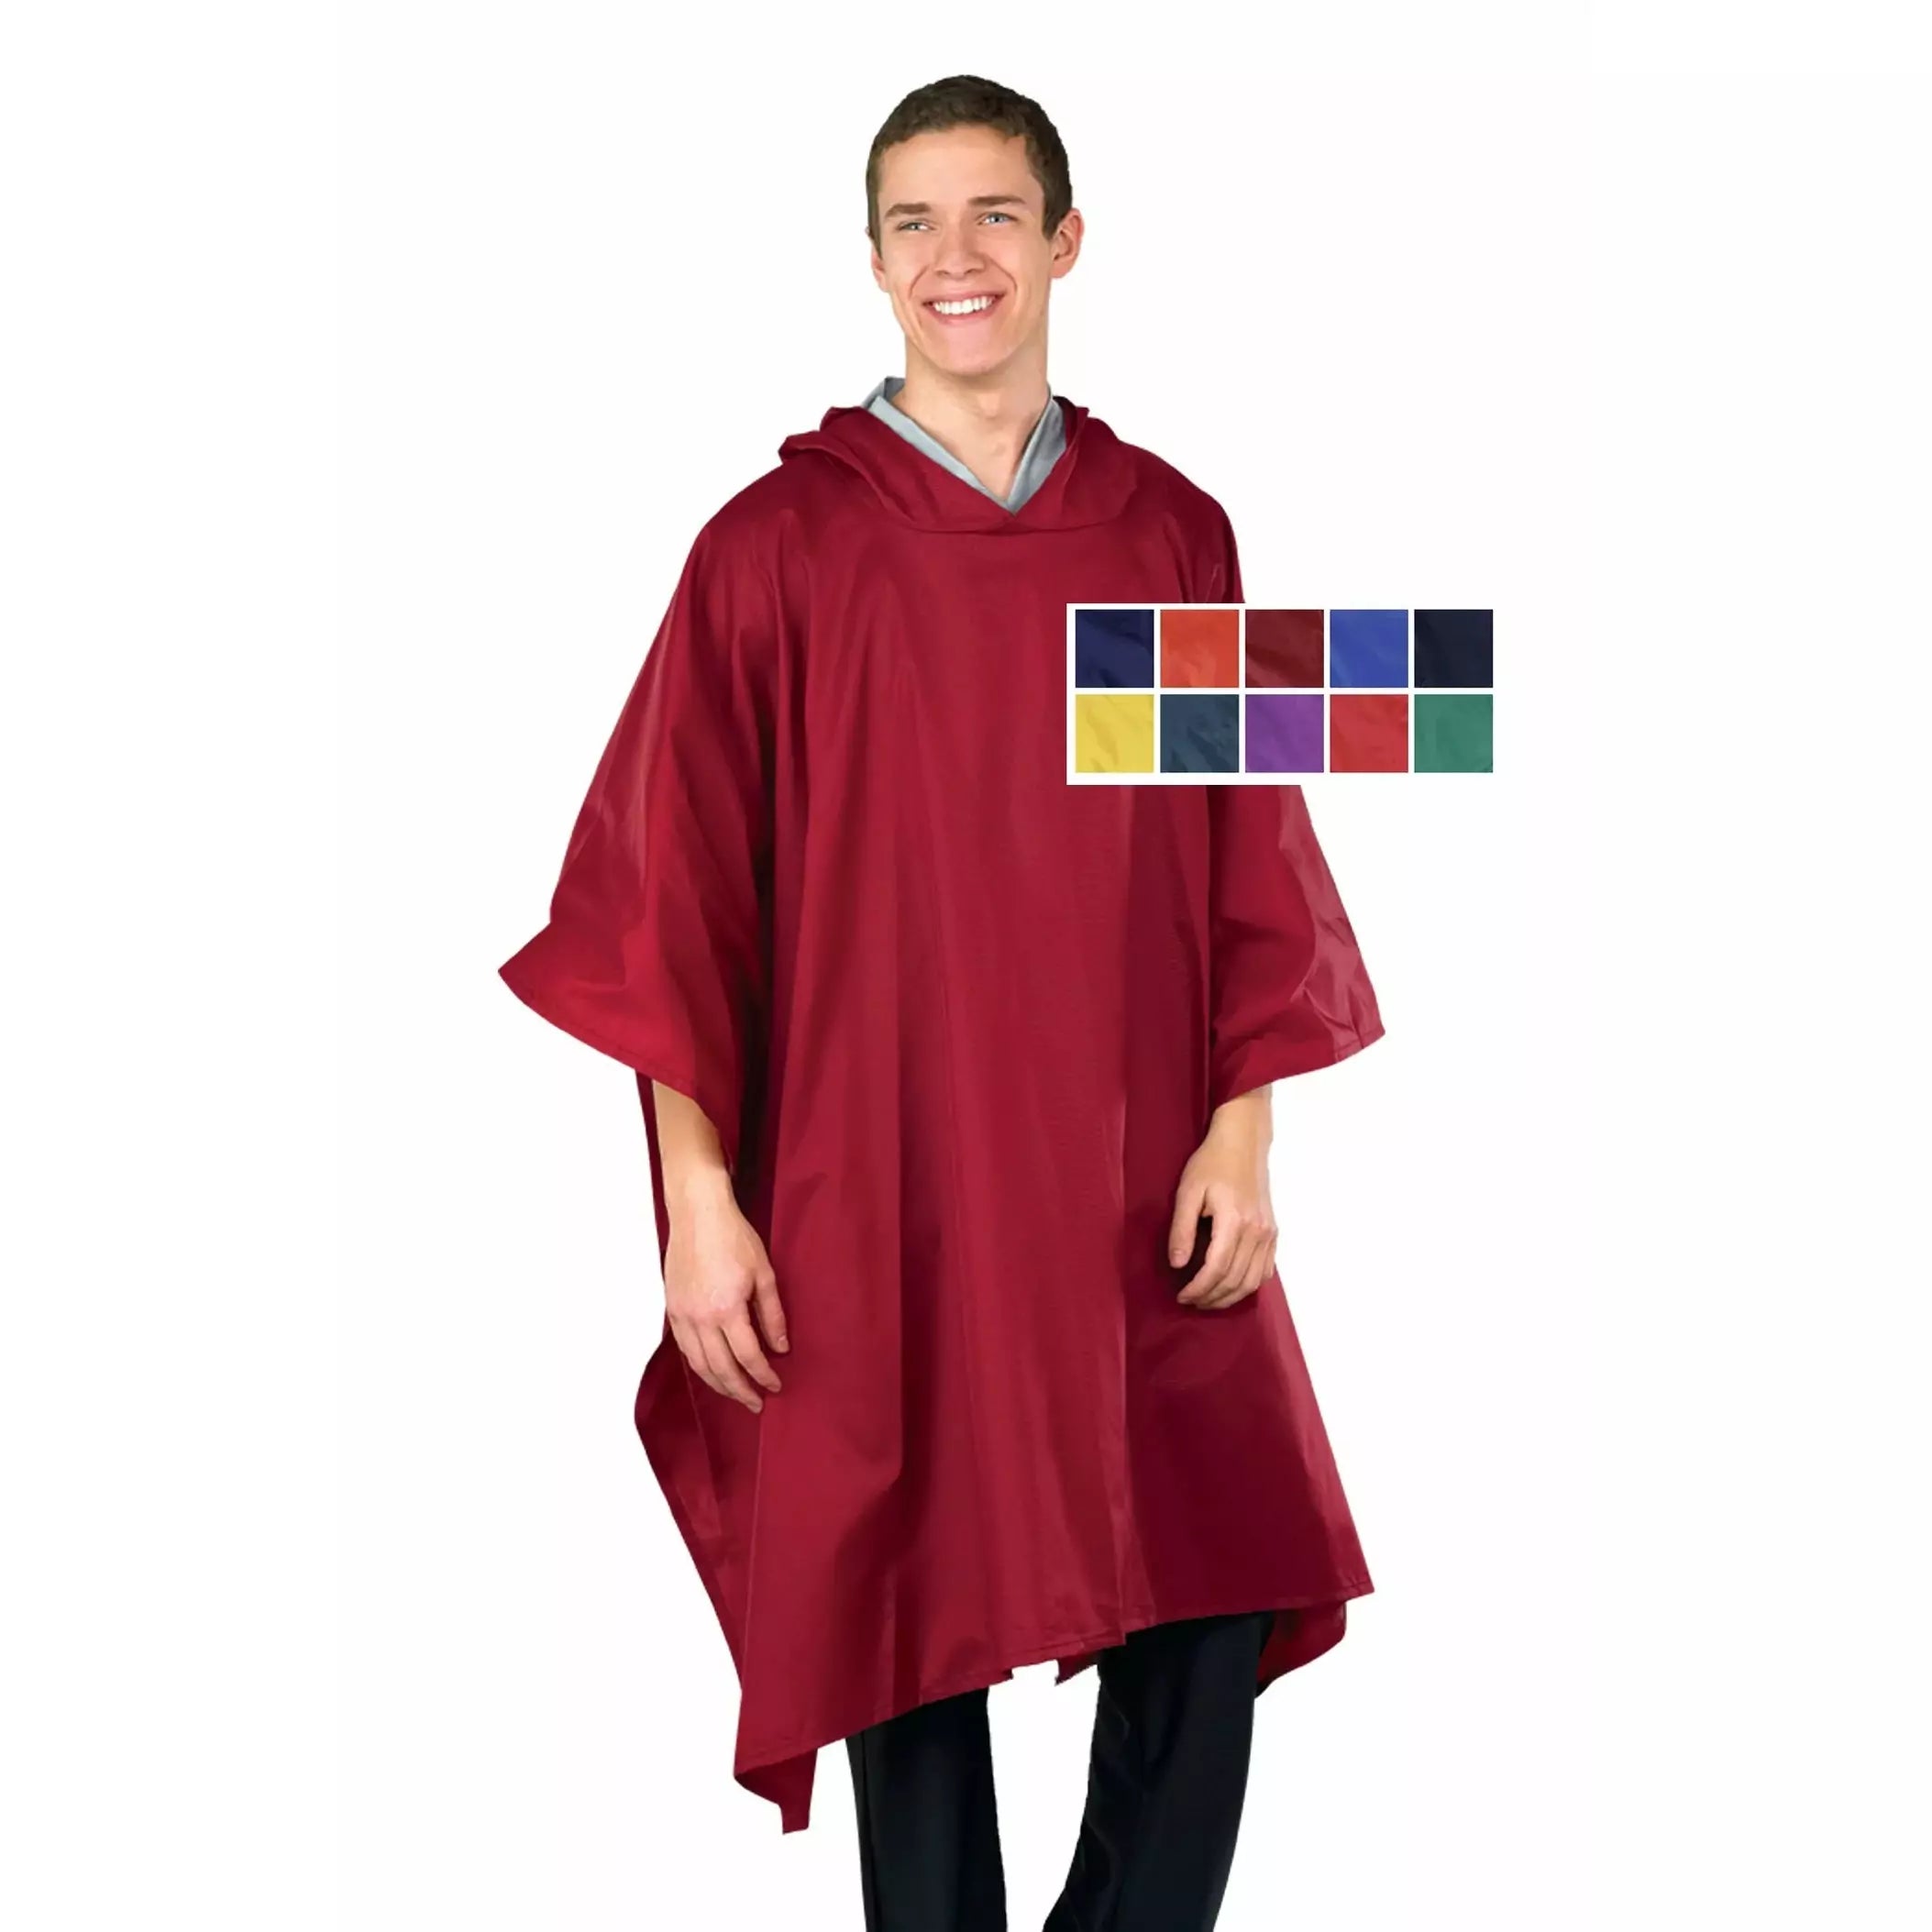 Spectra-Lite Poncho without Pocket